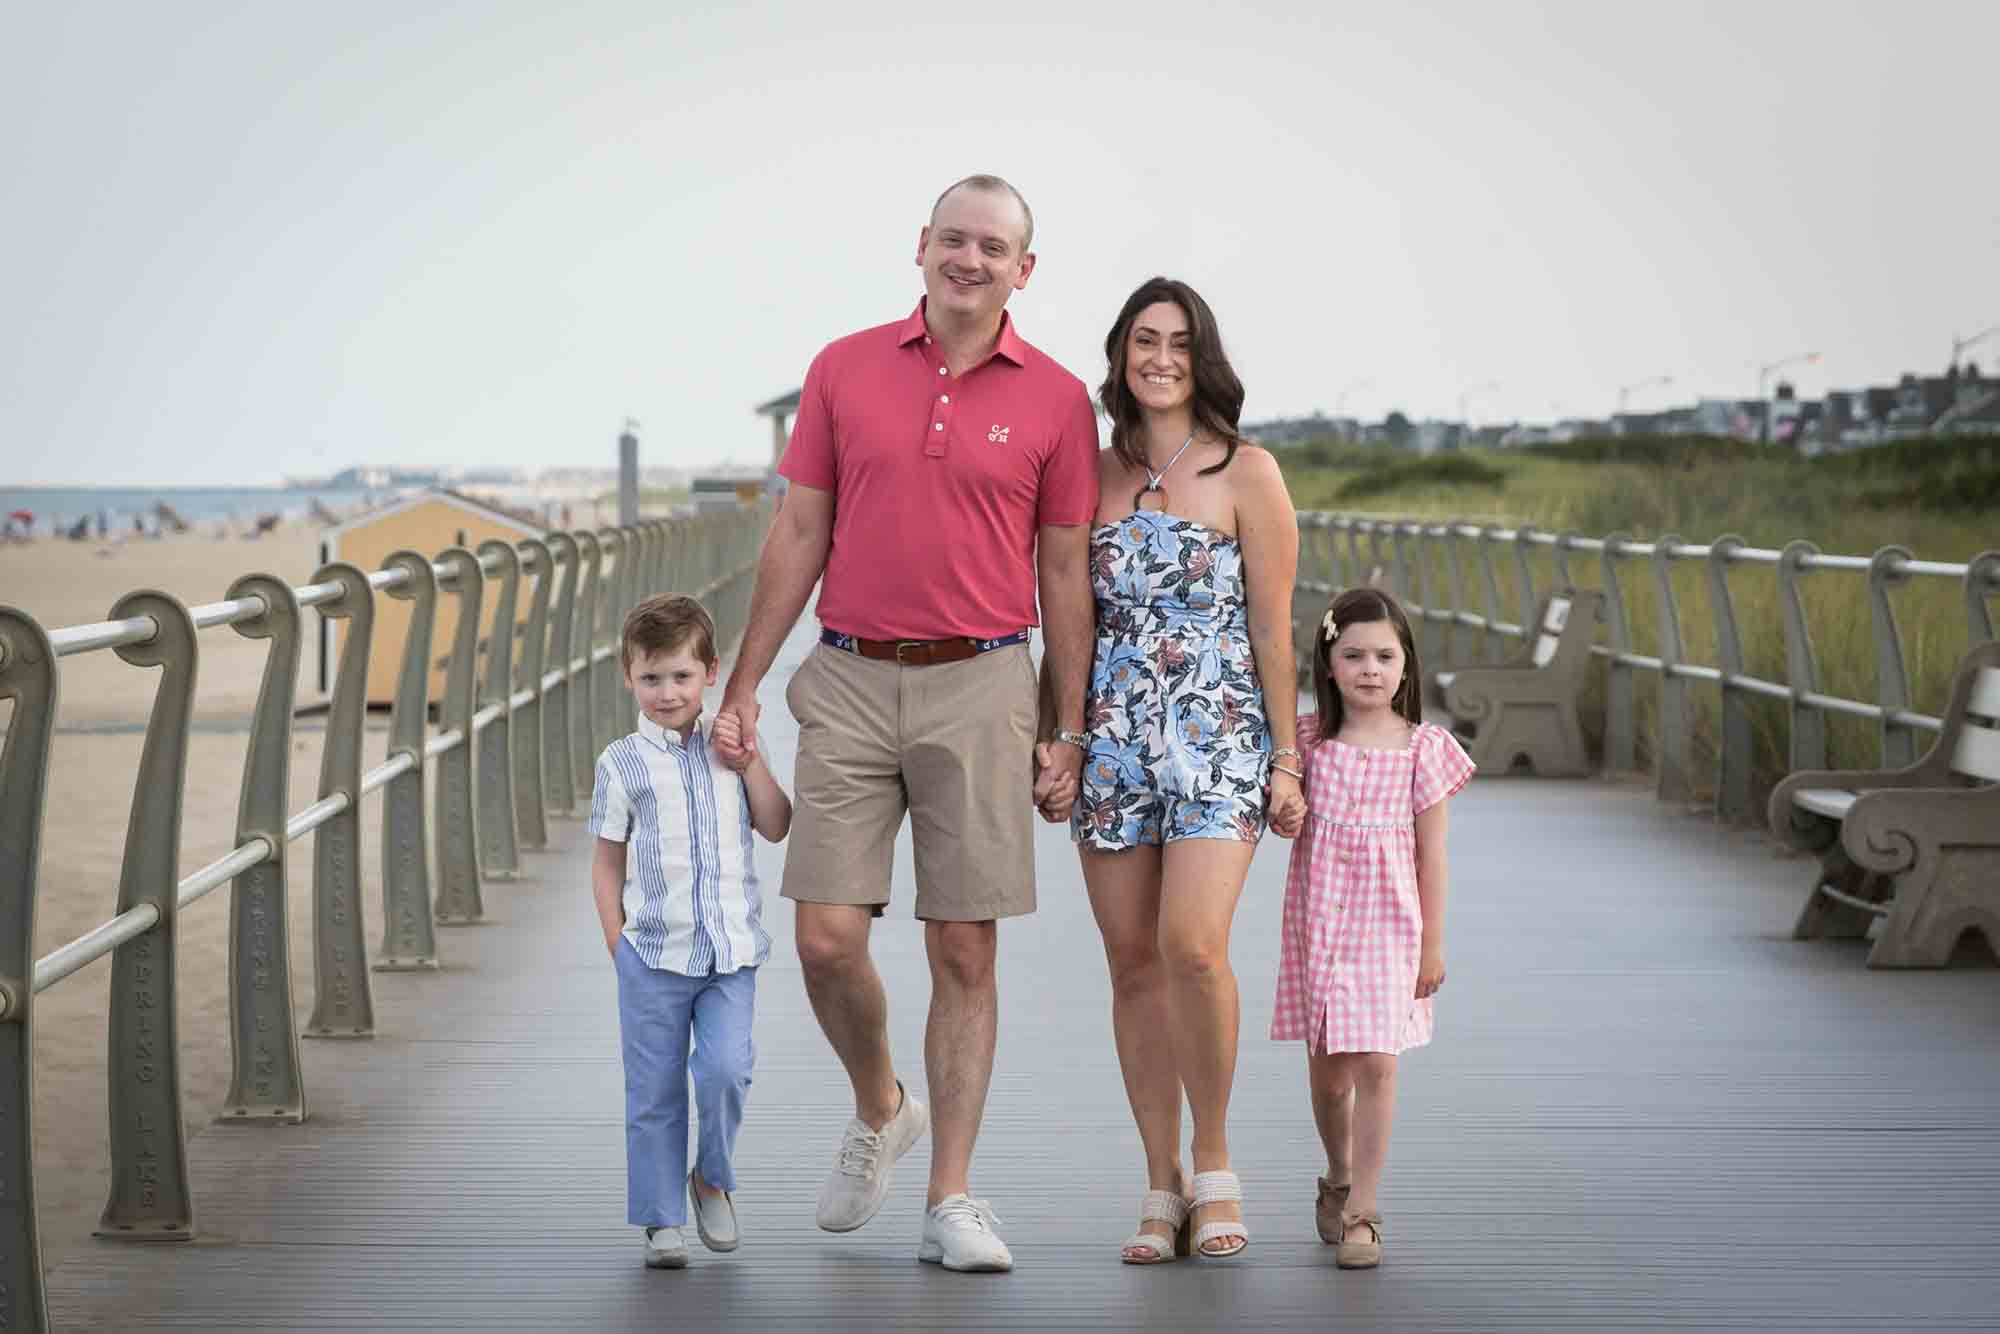 Parents and two kids walking on boardwalk in Spring Lake, NJ for an article on how to get the best beach photos